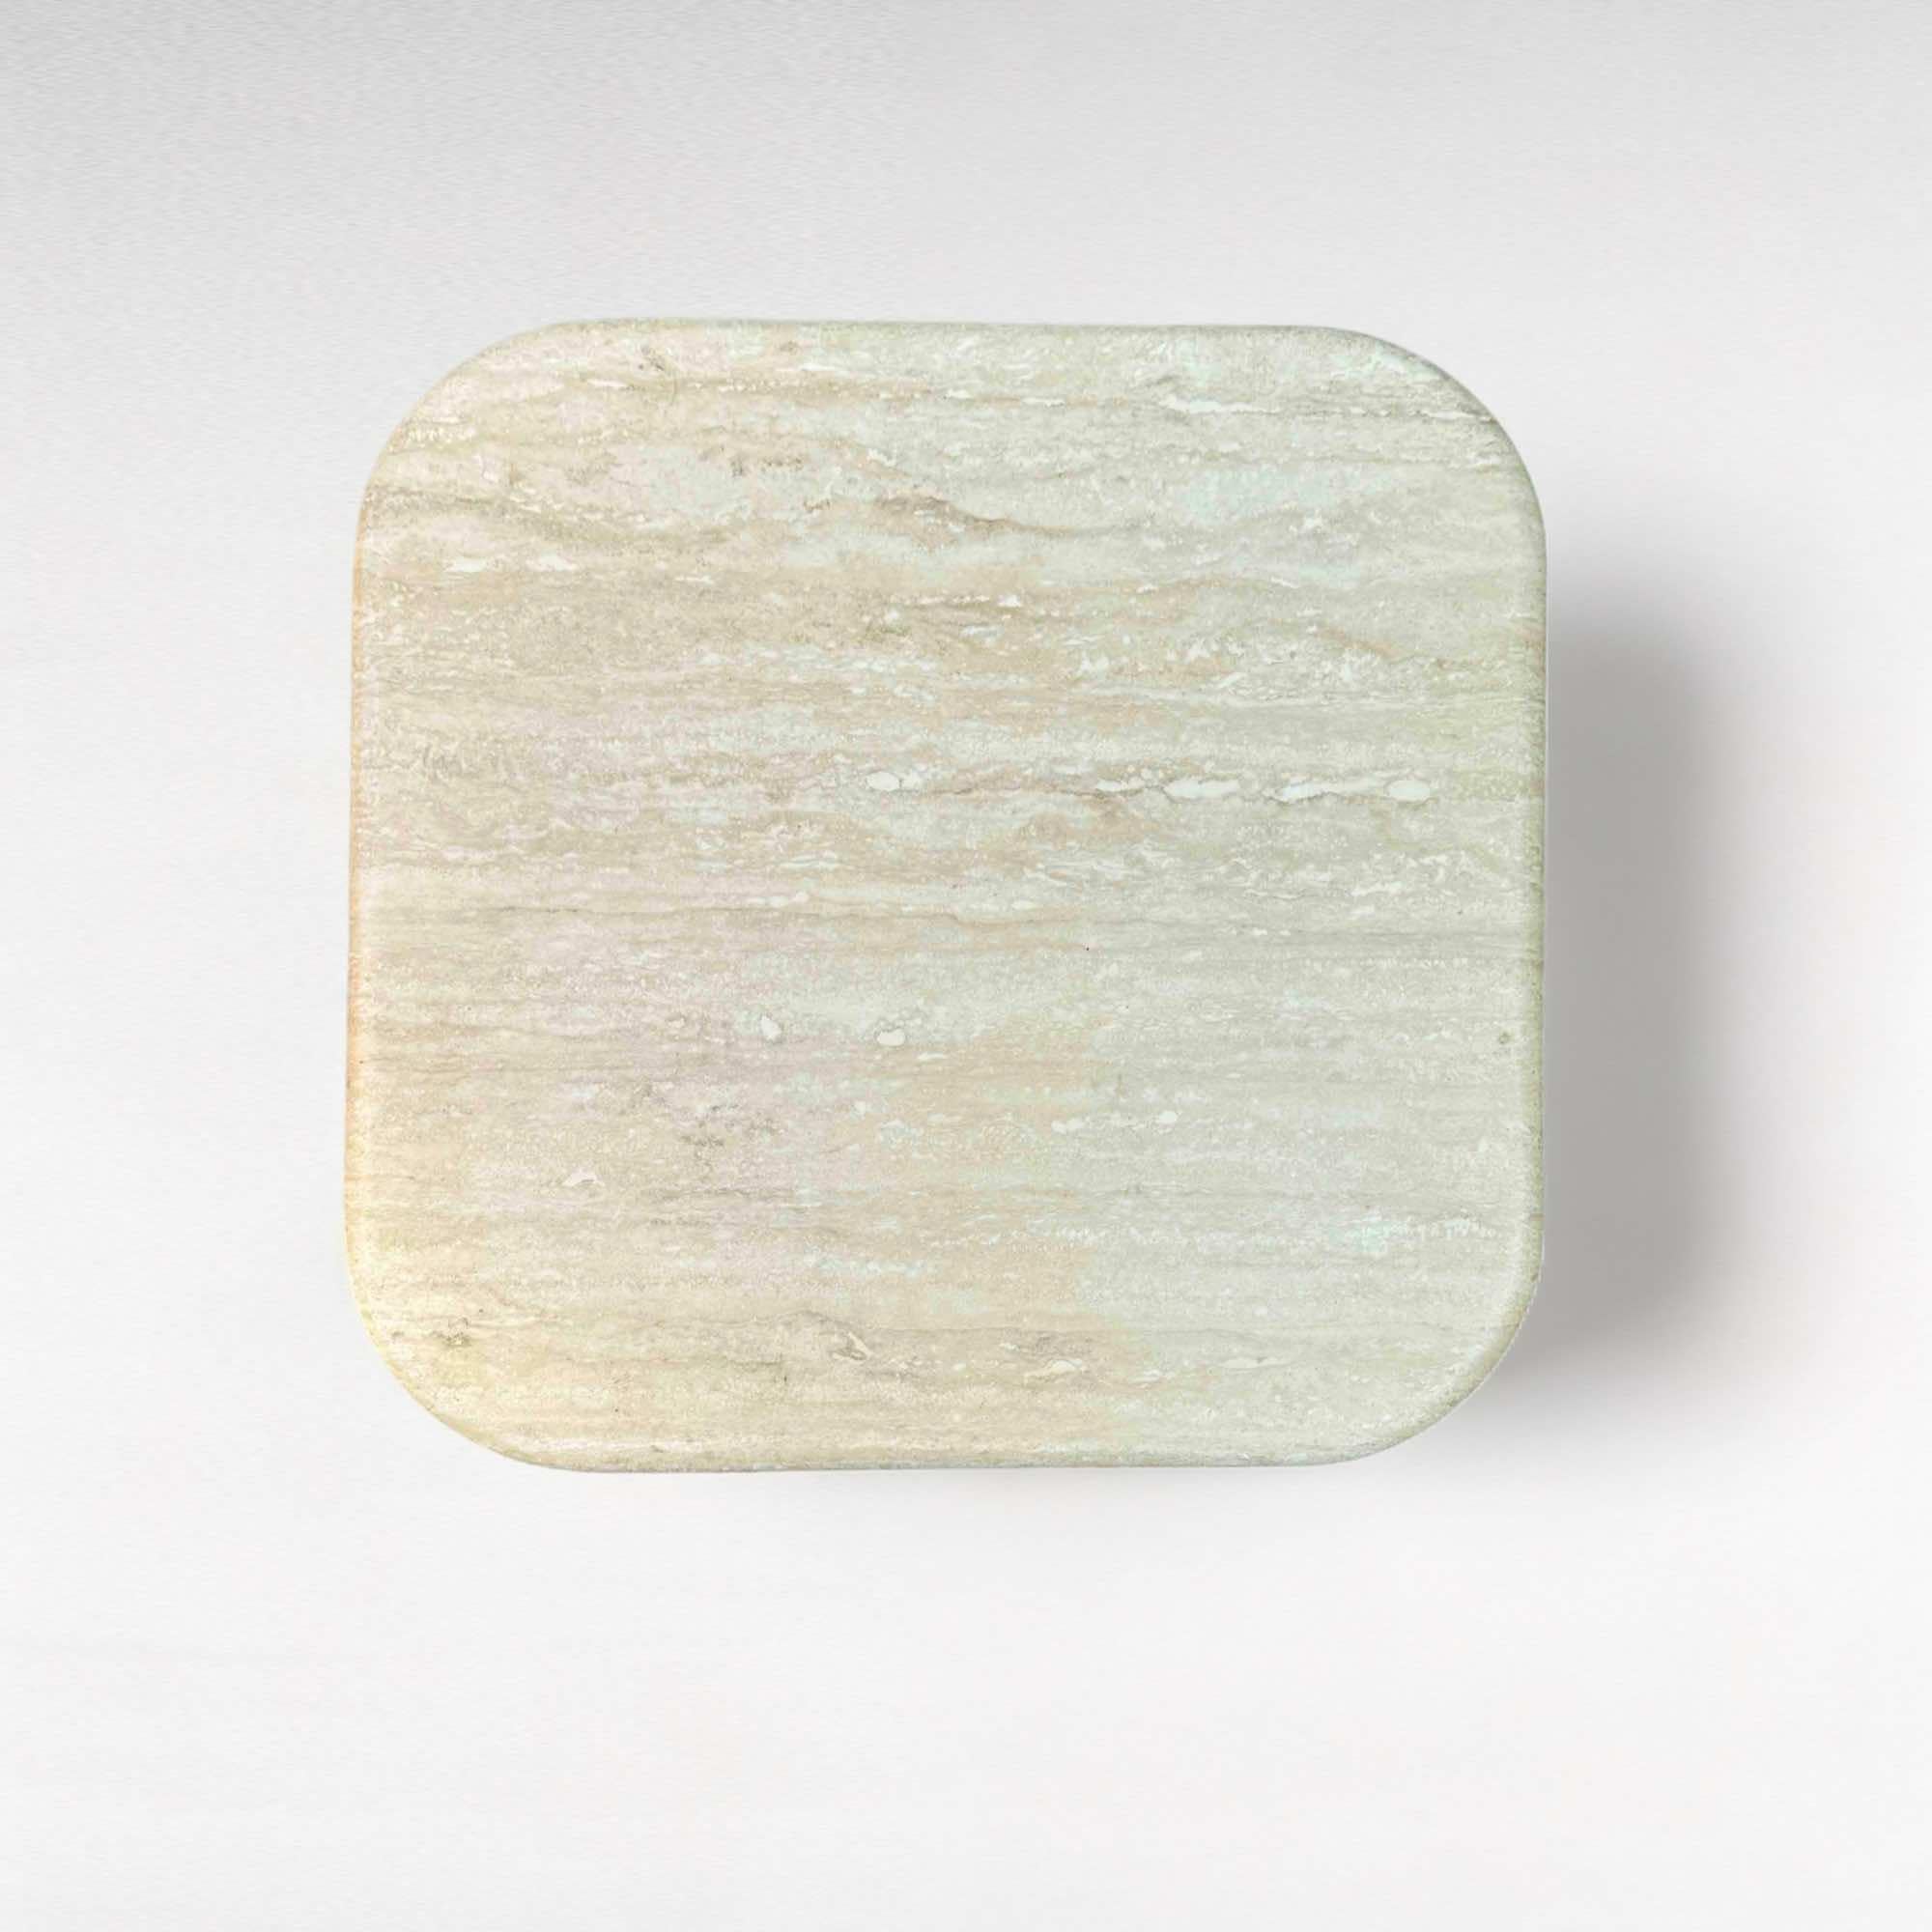 Square Travertine Coffee Table with Rounded Corners, Italy, 1970 In Good Condition For Sale In Hemiksem, VAN